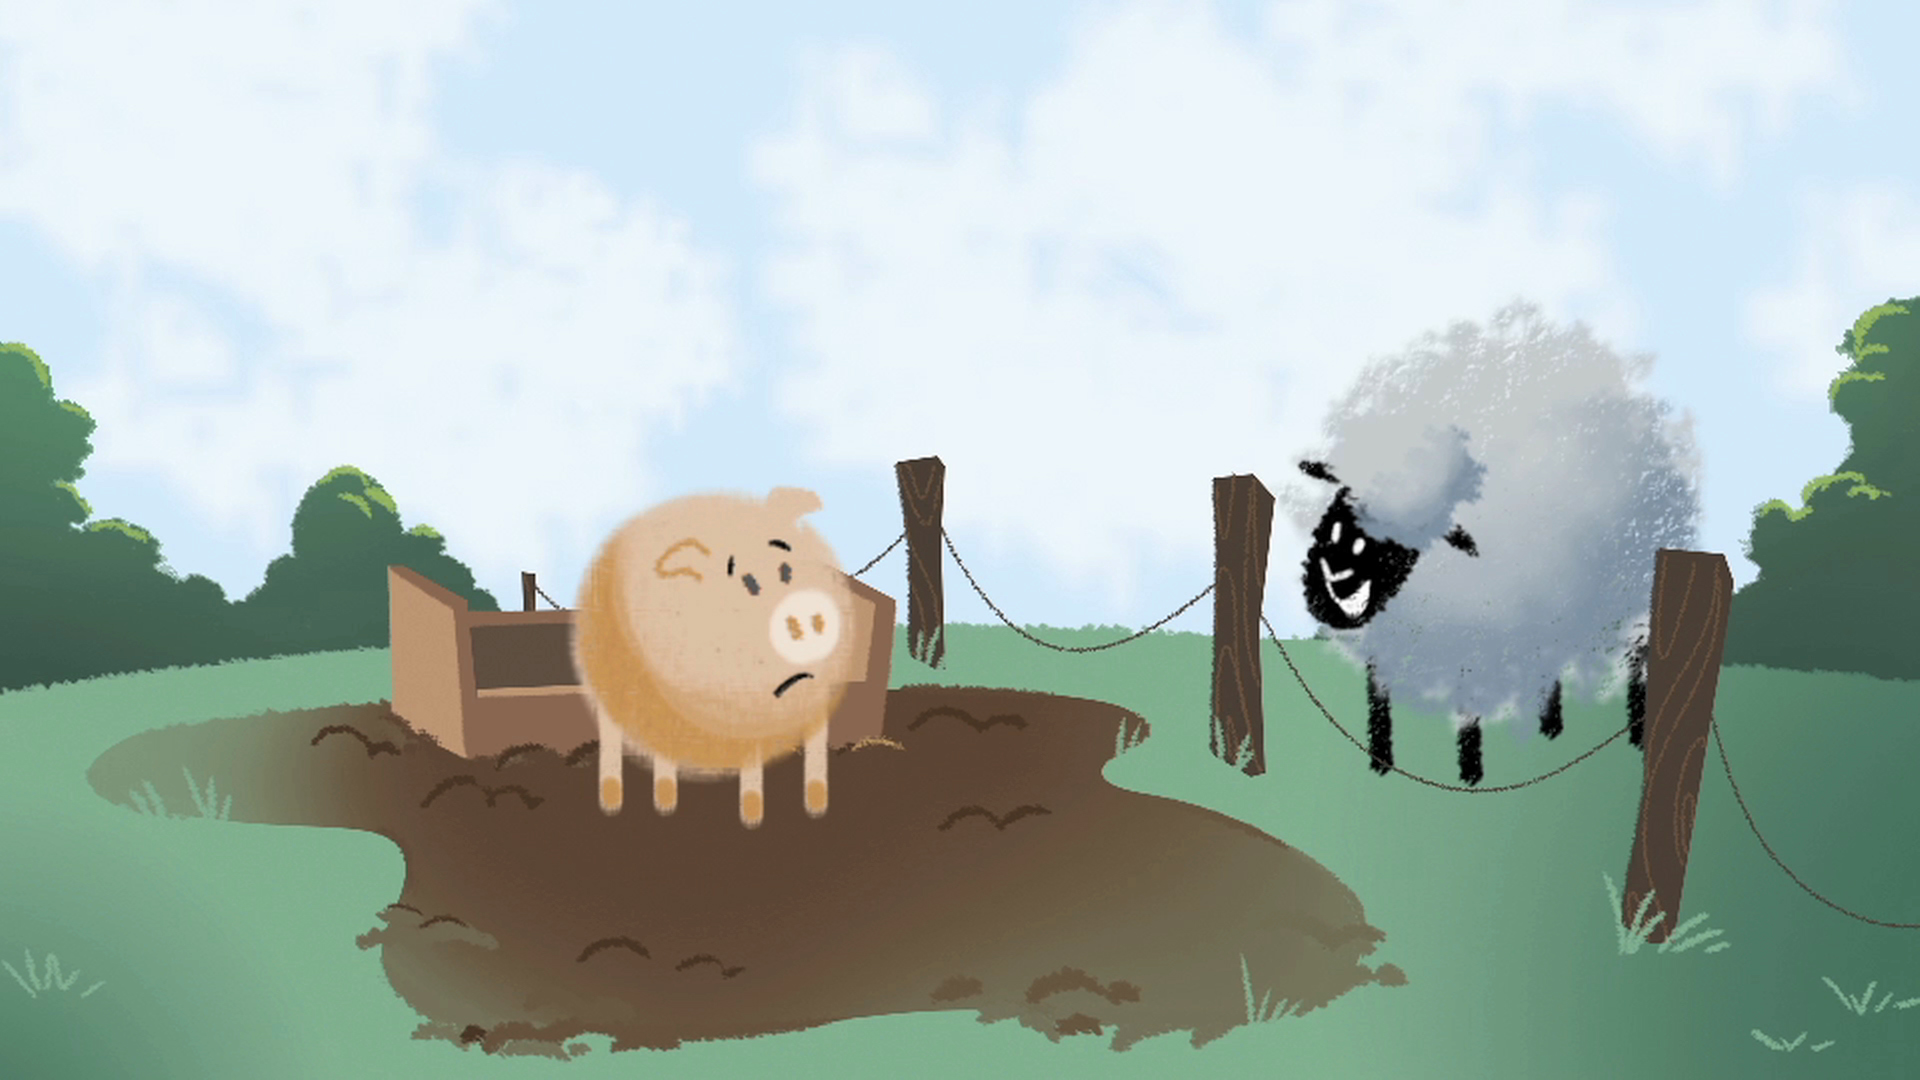 An animated image of a pig standing in mud on the other side of the fence of a lamb.